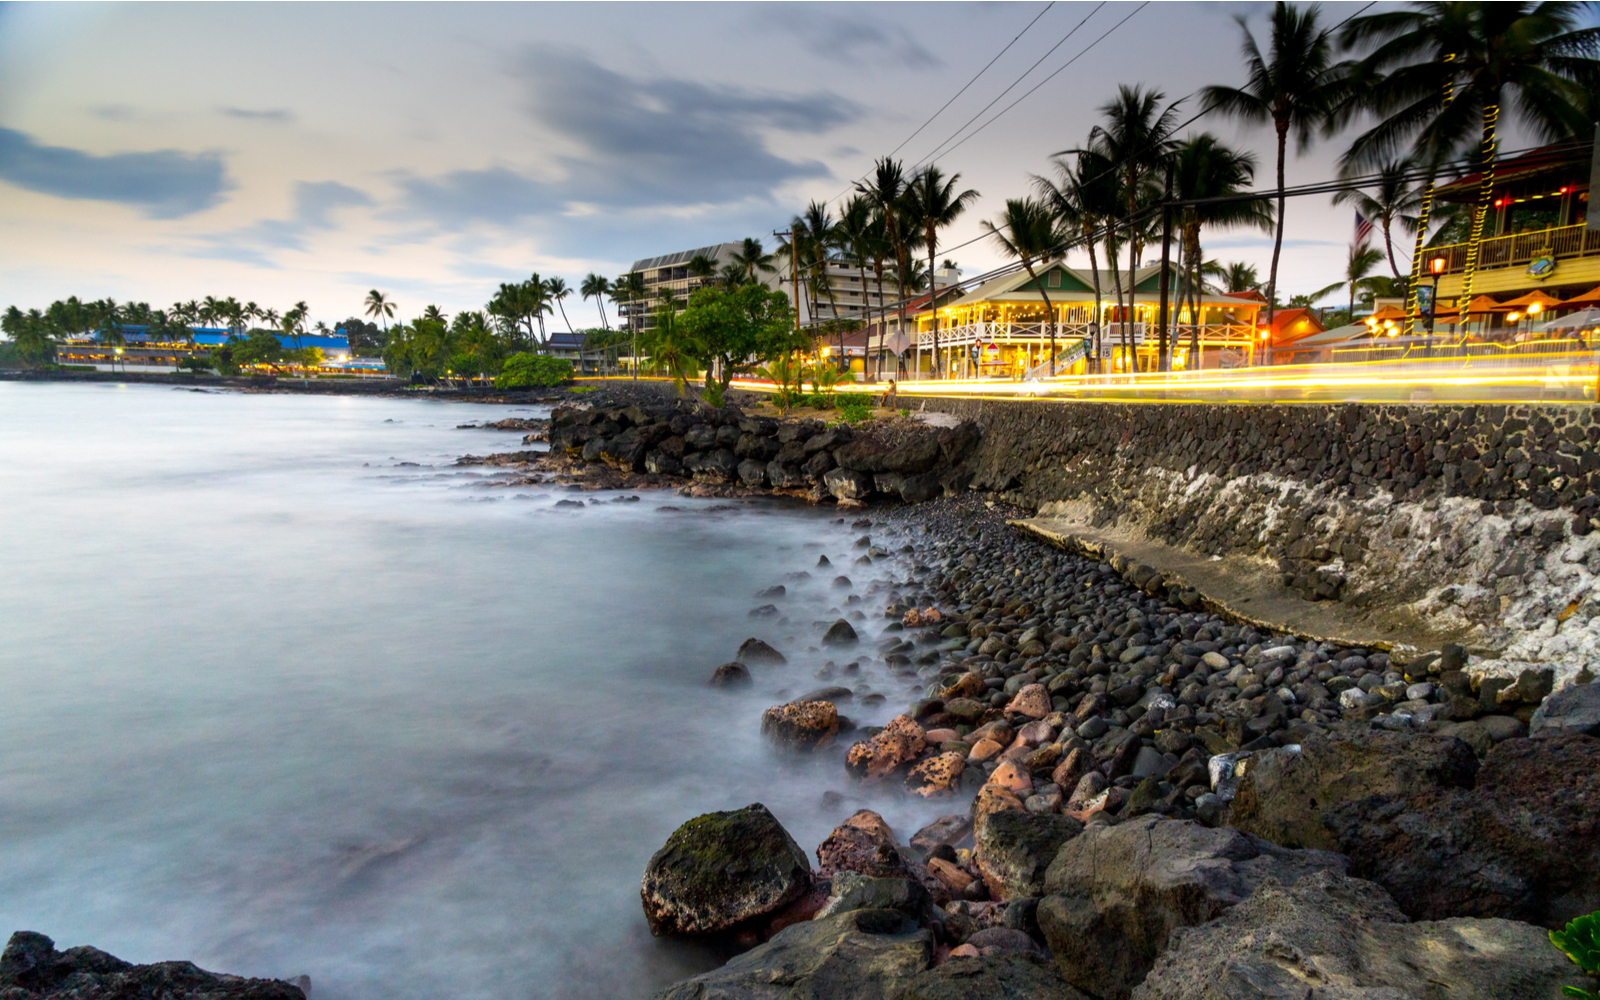 Featured image of the Kona coastline with a rocky dropoff featuring the best hotels in Kona in frame